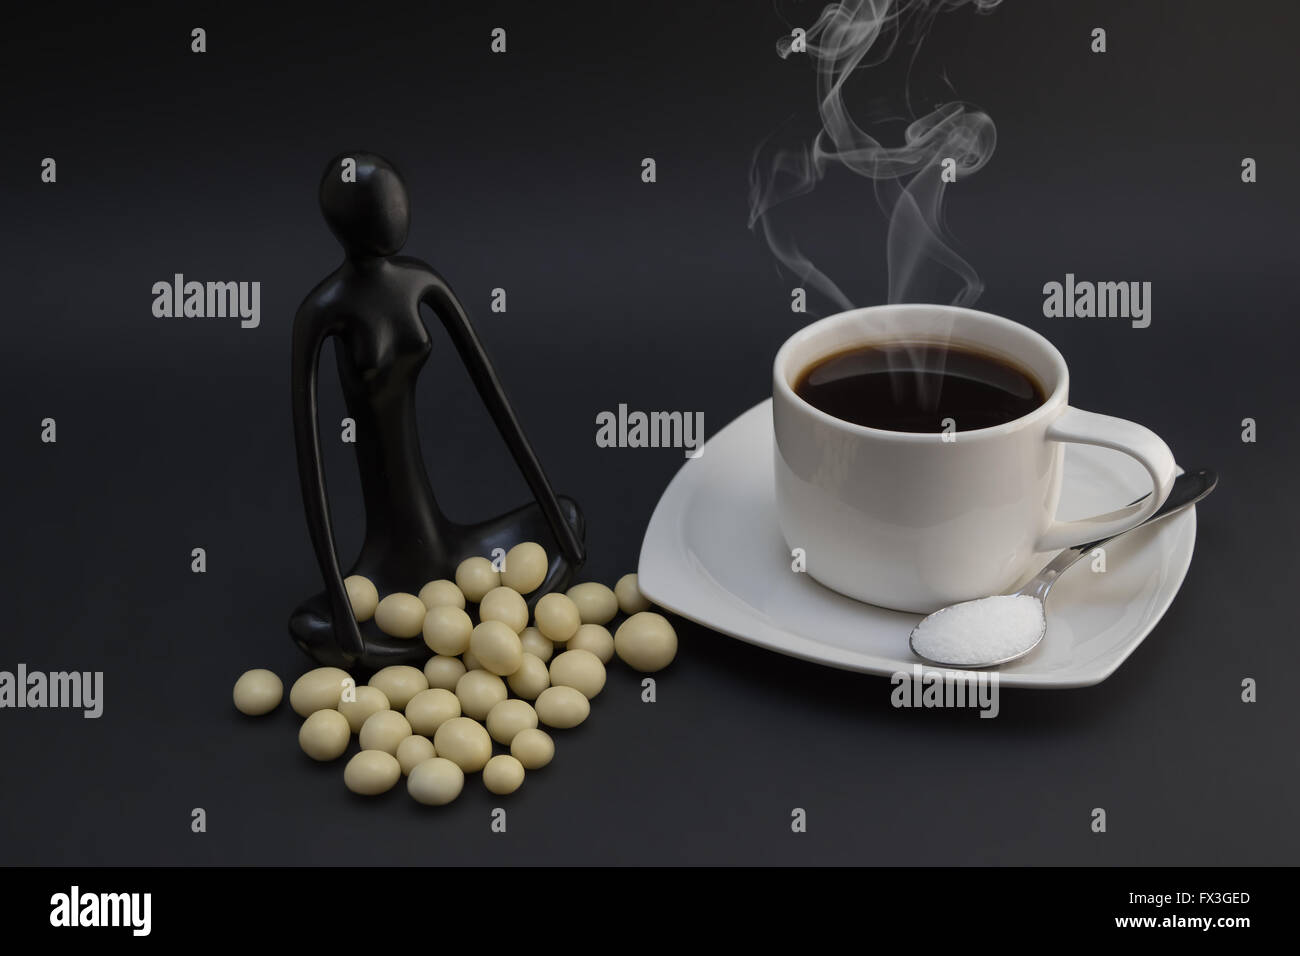 Hot coffee, sweets and sugar Stock Photo